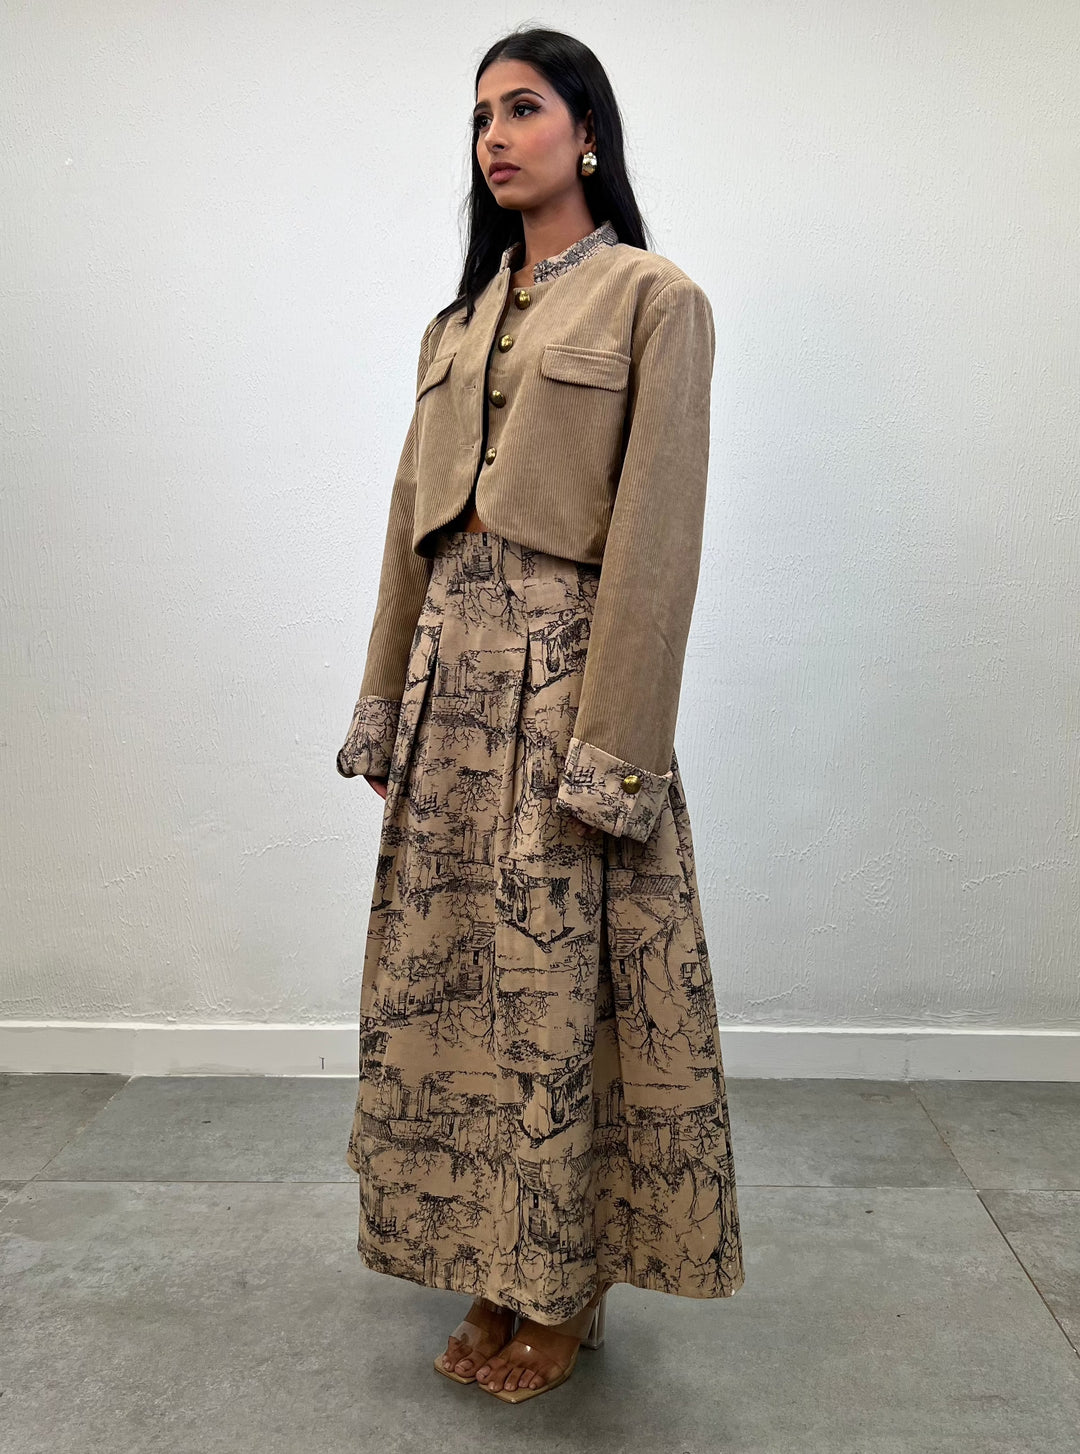 Crop Jacket with the matching Long Box Pleated Skirt